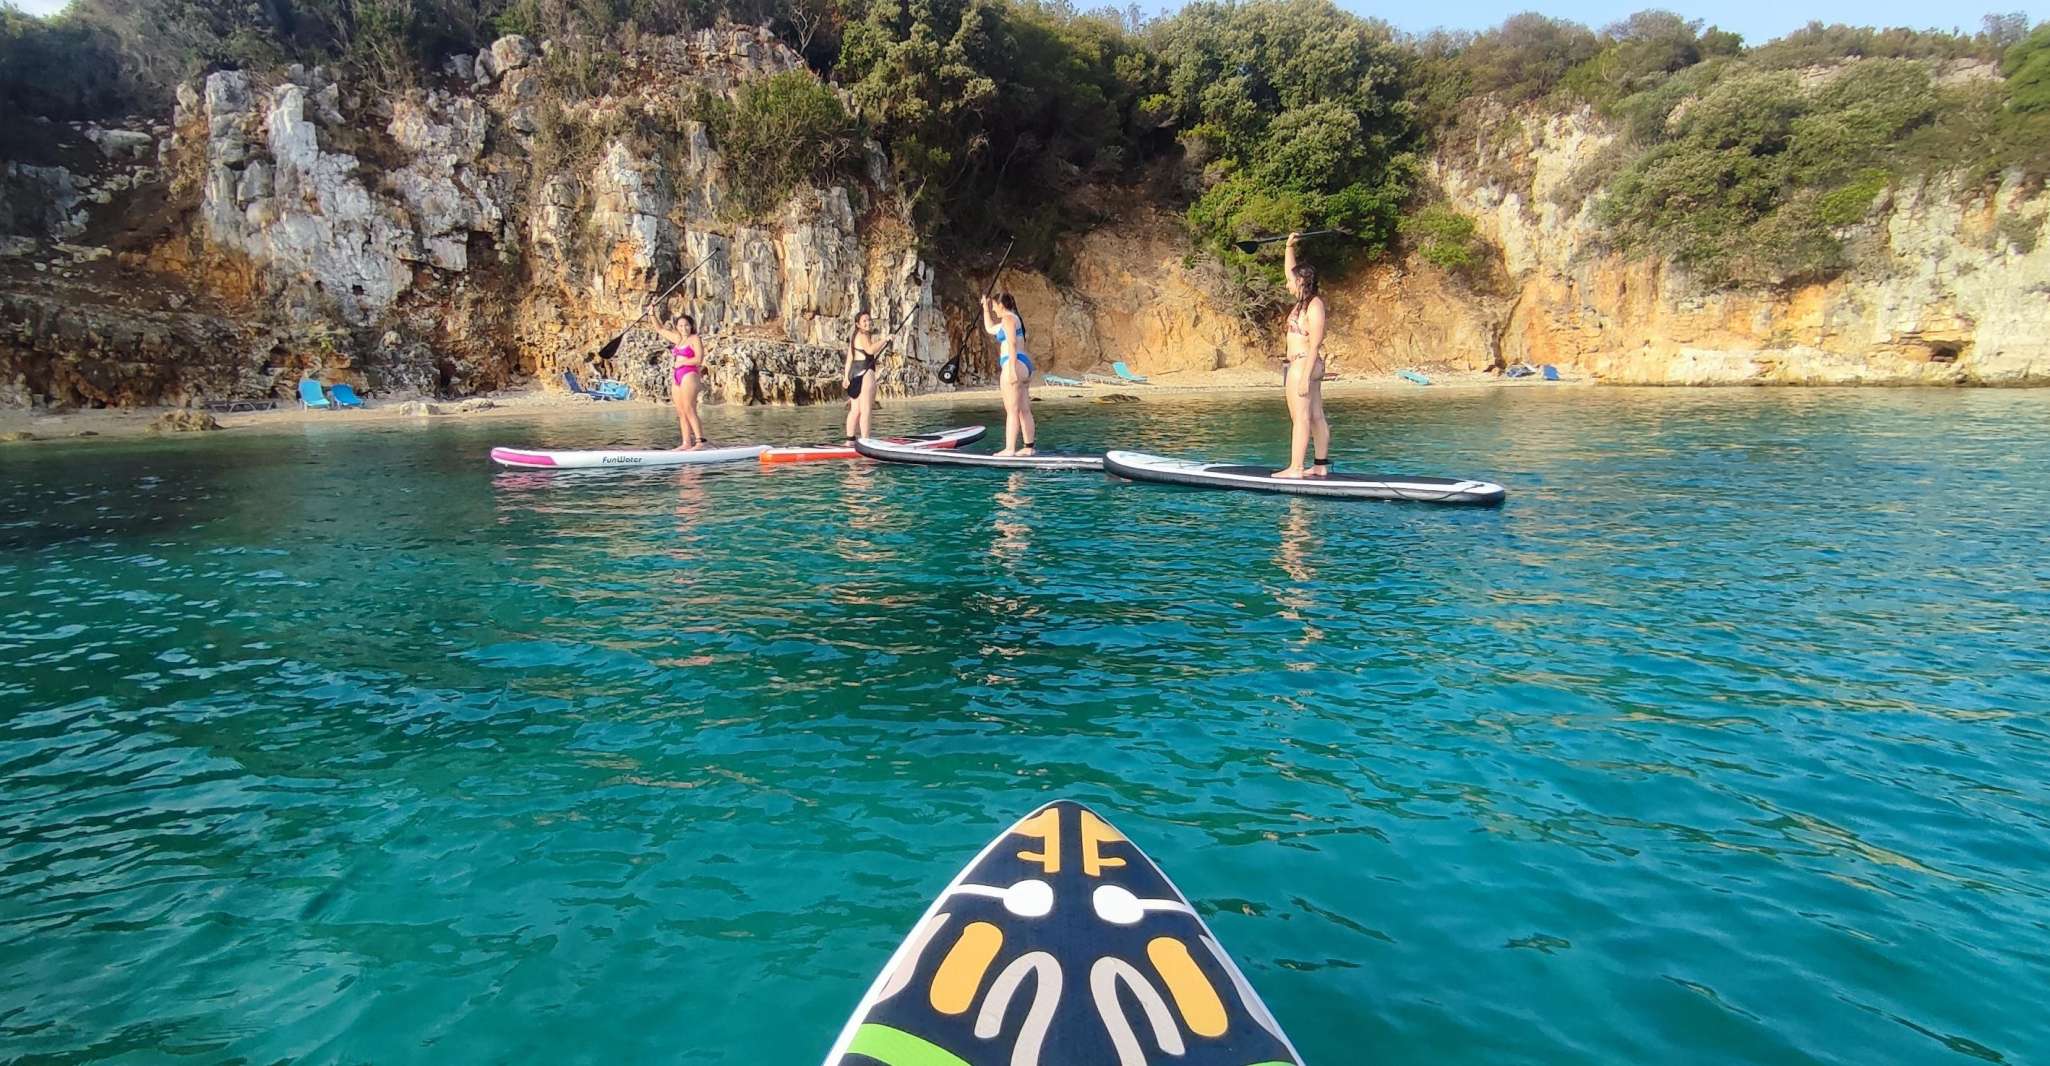 iStand-Up Paddleboarding Tour around Ksamil islands - Housity